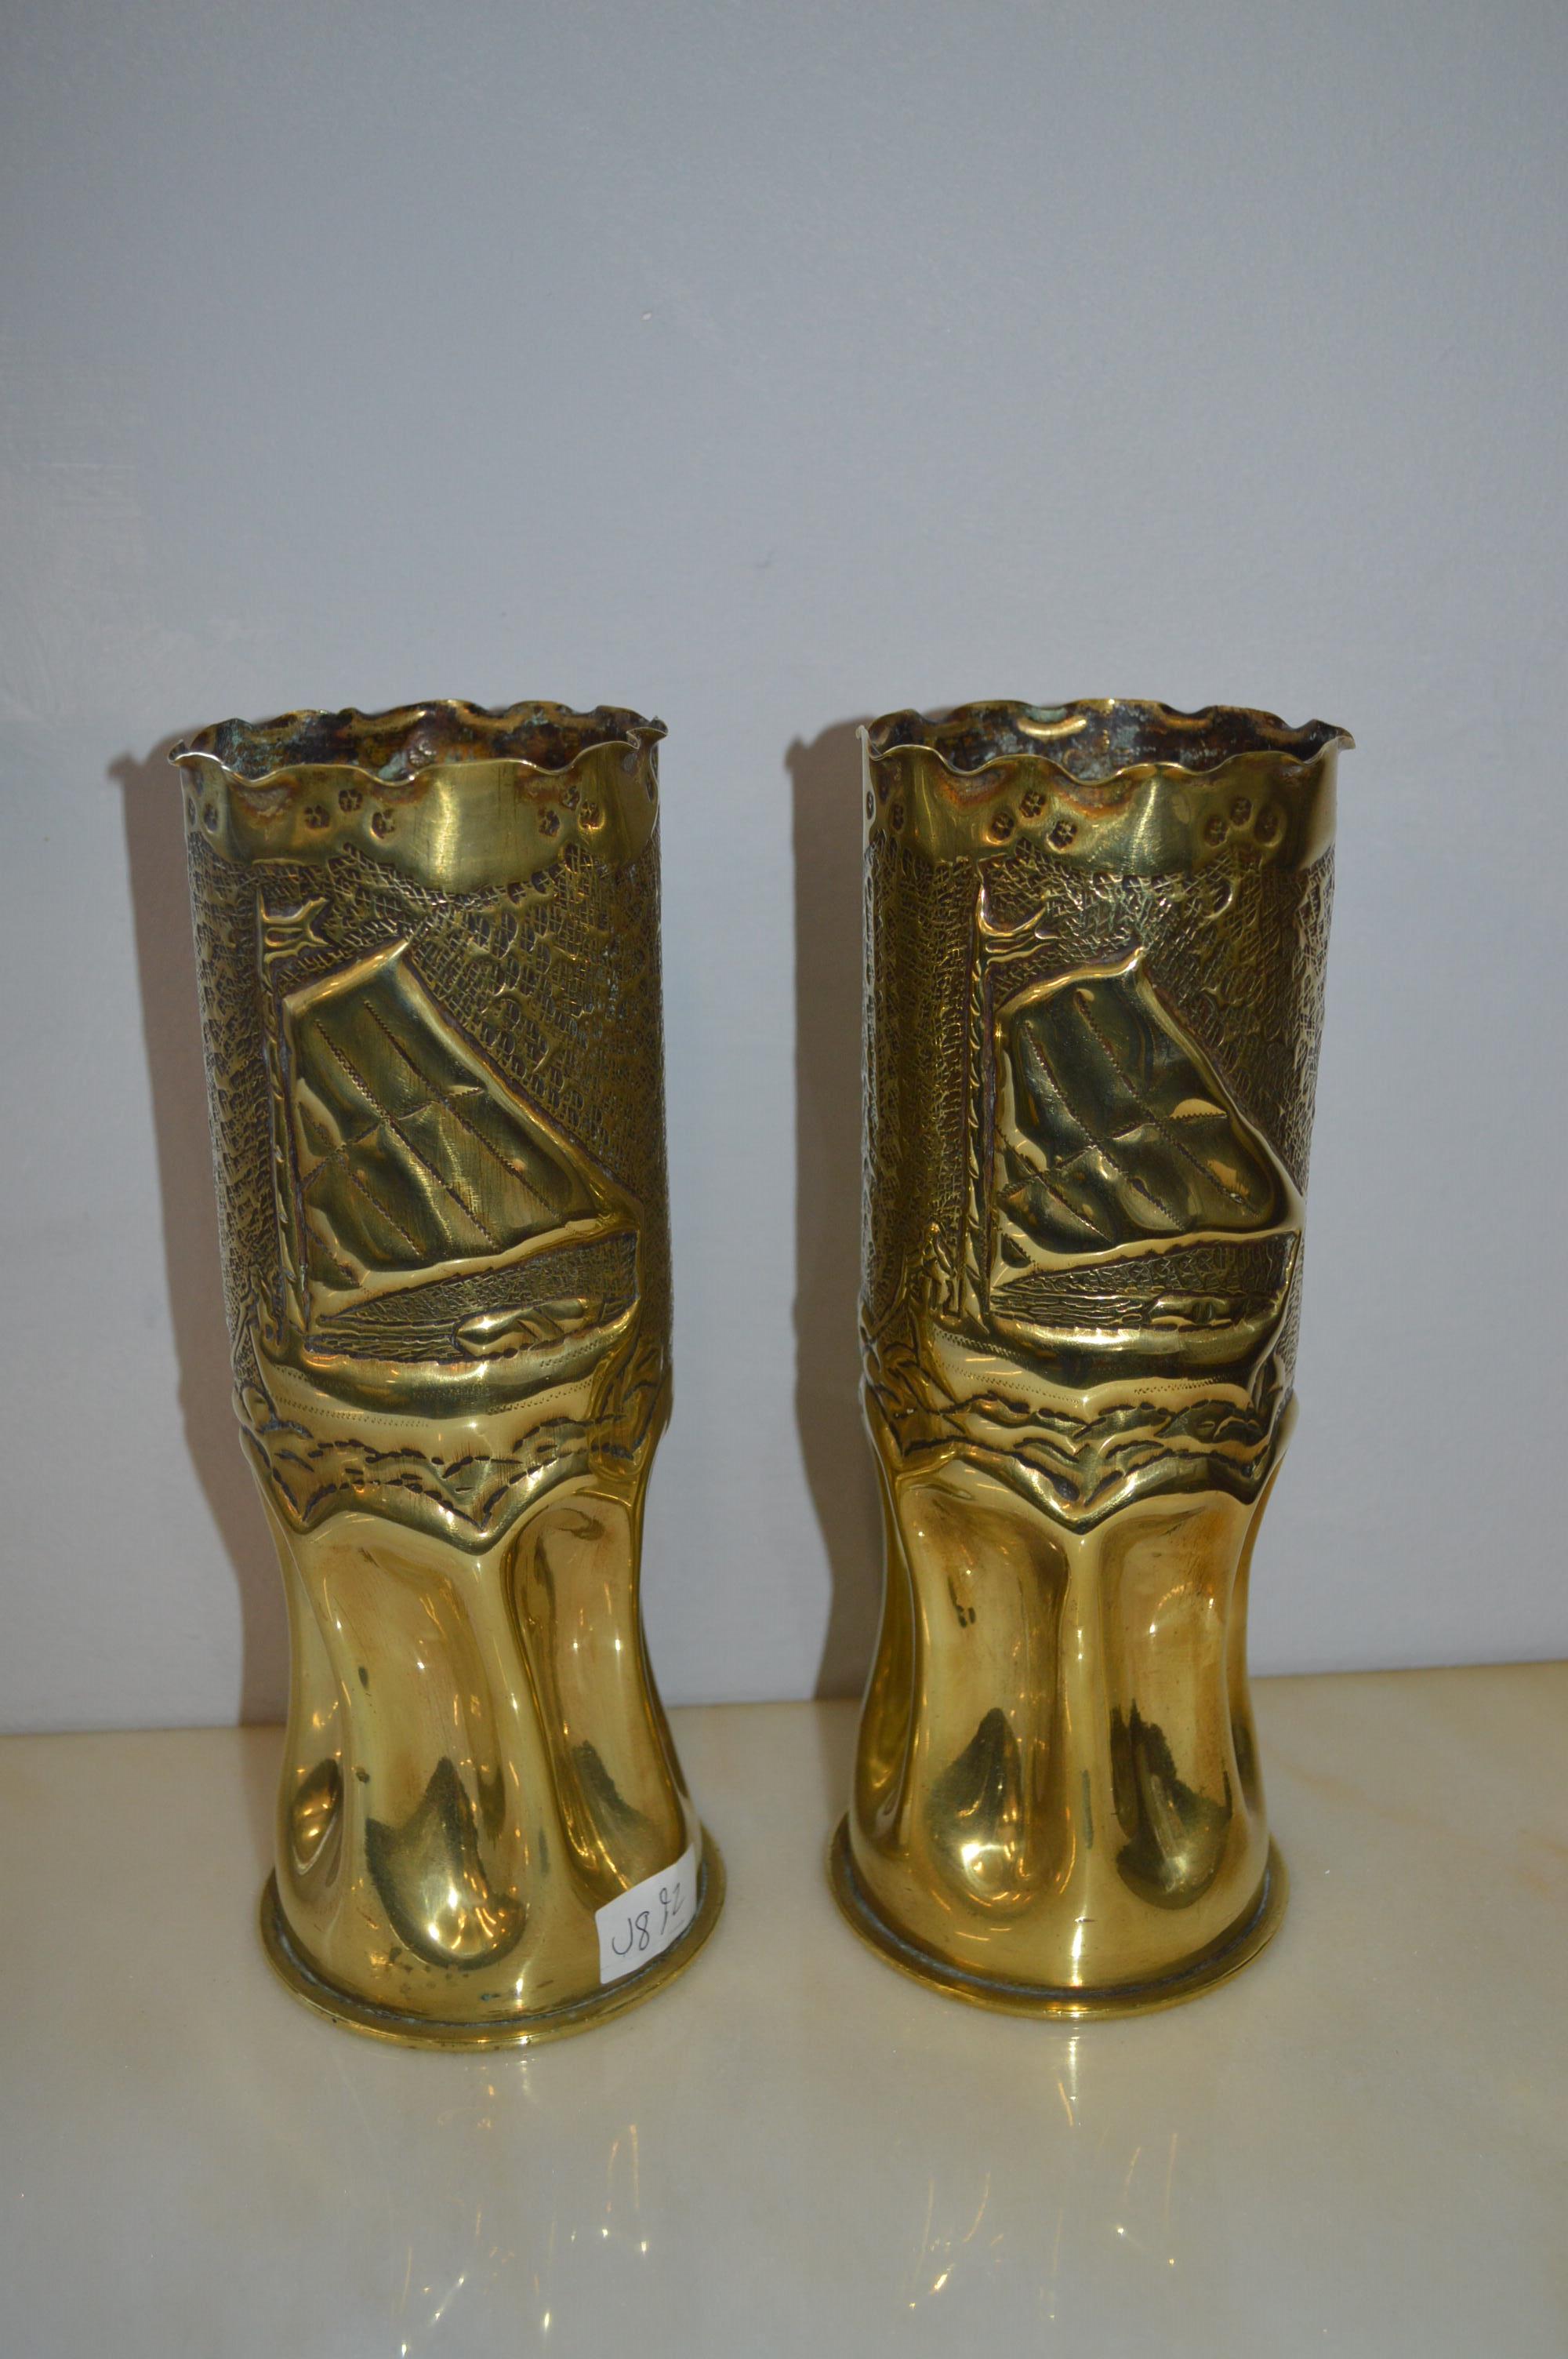 Pair of Trench Art Shell Cases - Image 2 of 3